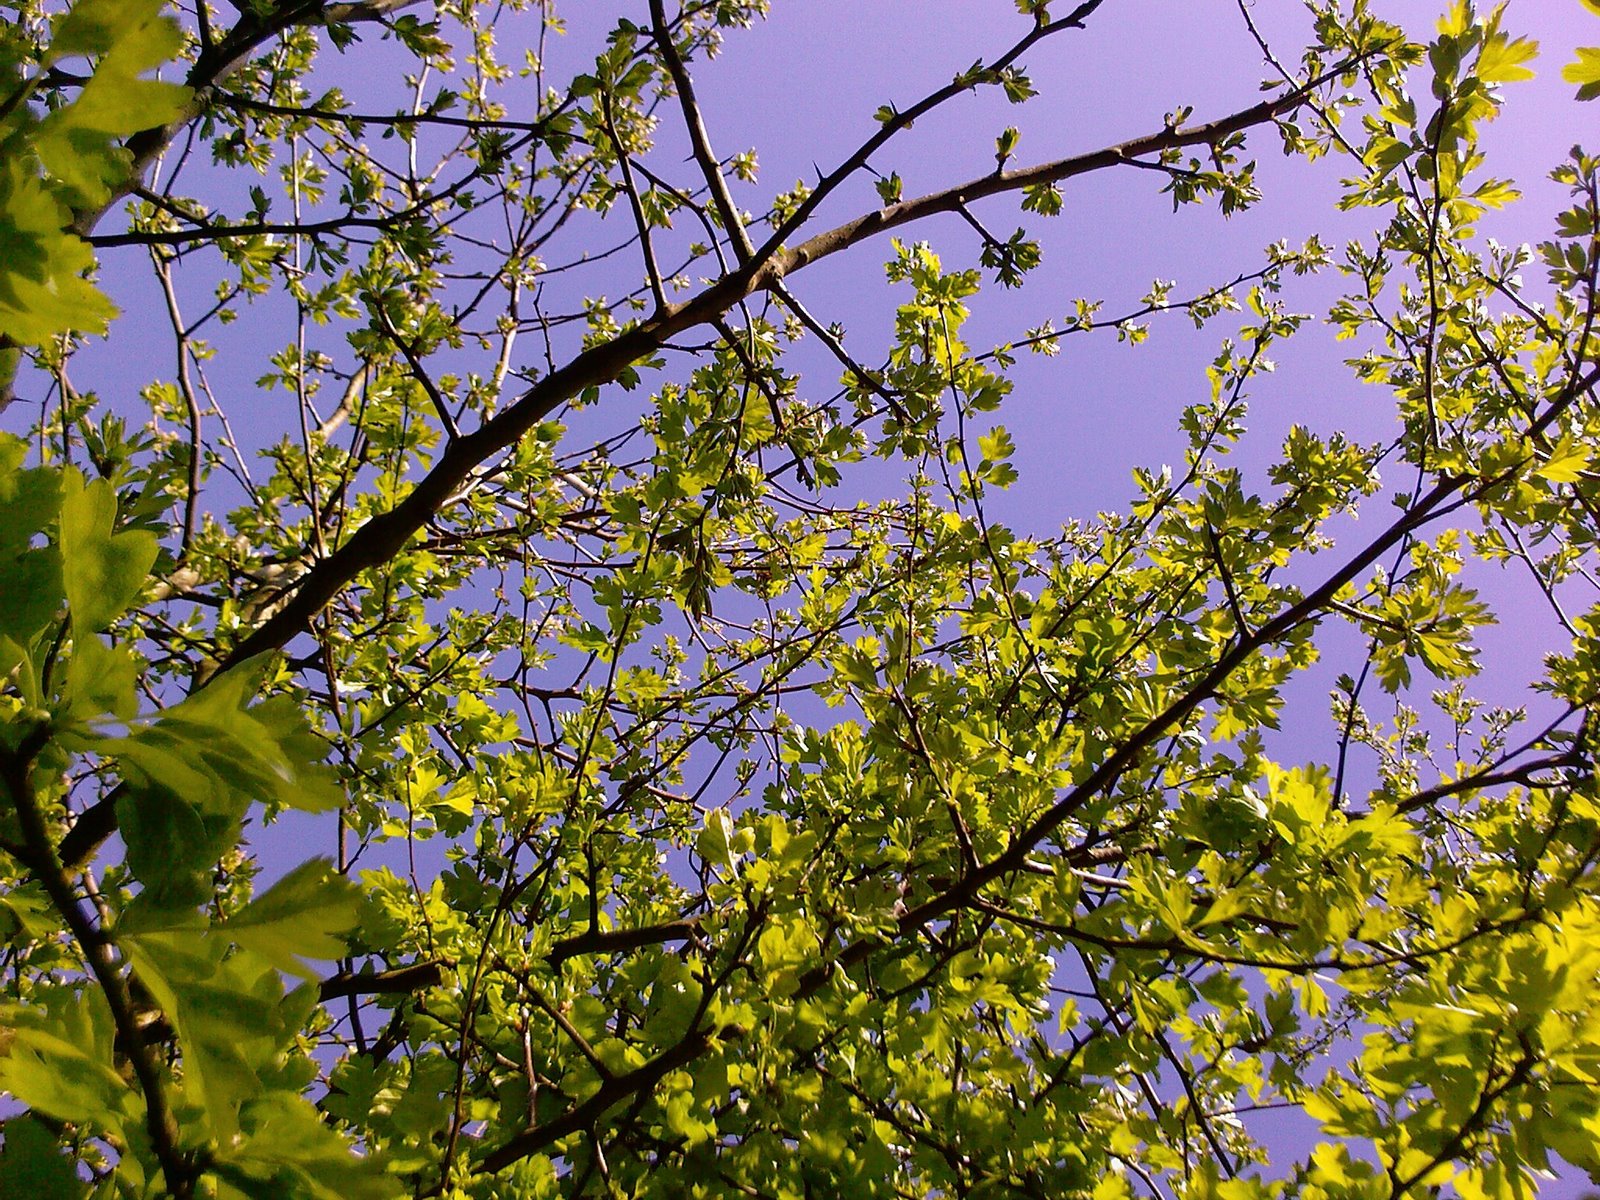 [LUCY+CORRANDER++-++LOOSE+AND+LEAFY++-++HAWTHORN+BRANCHES+IN+YOUNG+LEAF++-++MARCH+29TH+2009.jpg]